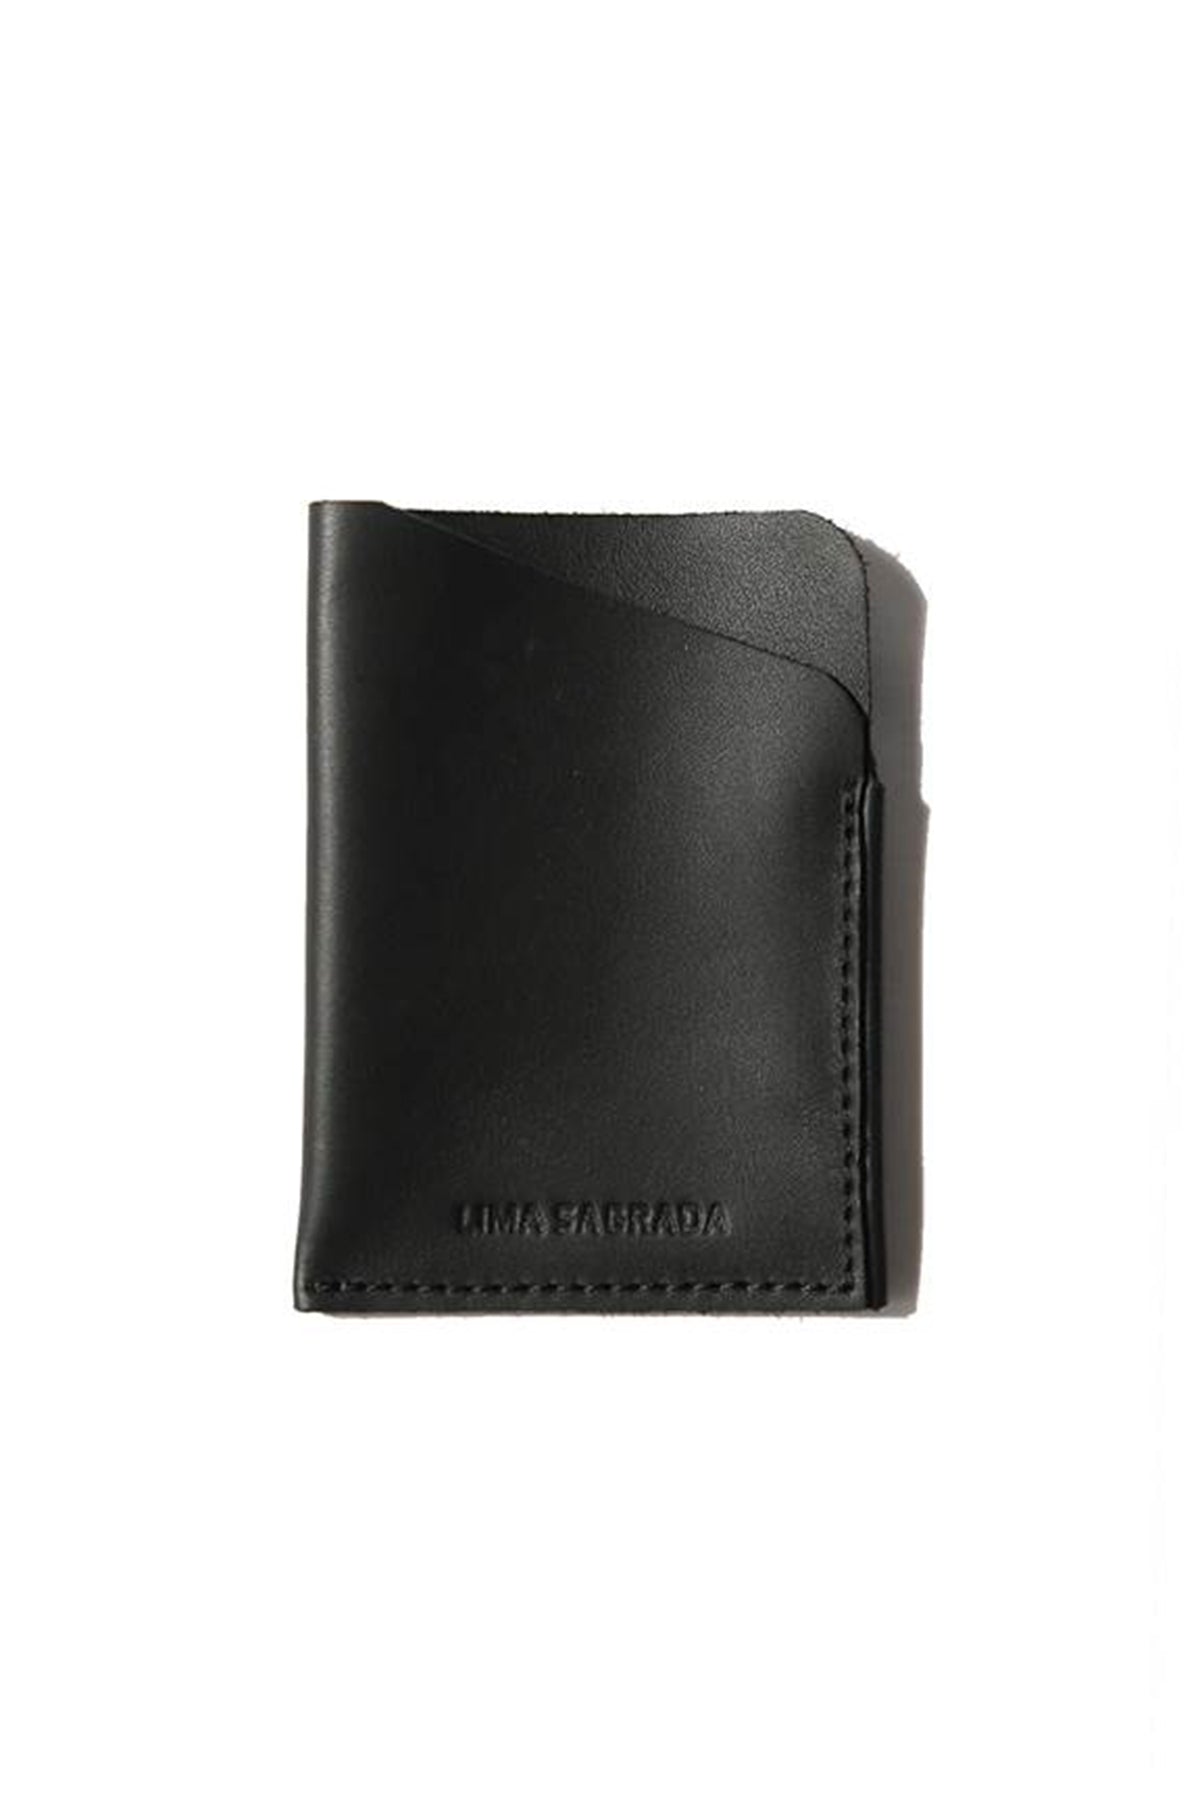 A sleek black SOFT LEATHER CARD HOLDER BY LIMA SAGRADA, handcrafted by local artisans, showcased against a clean white background.-600106565713